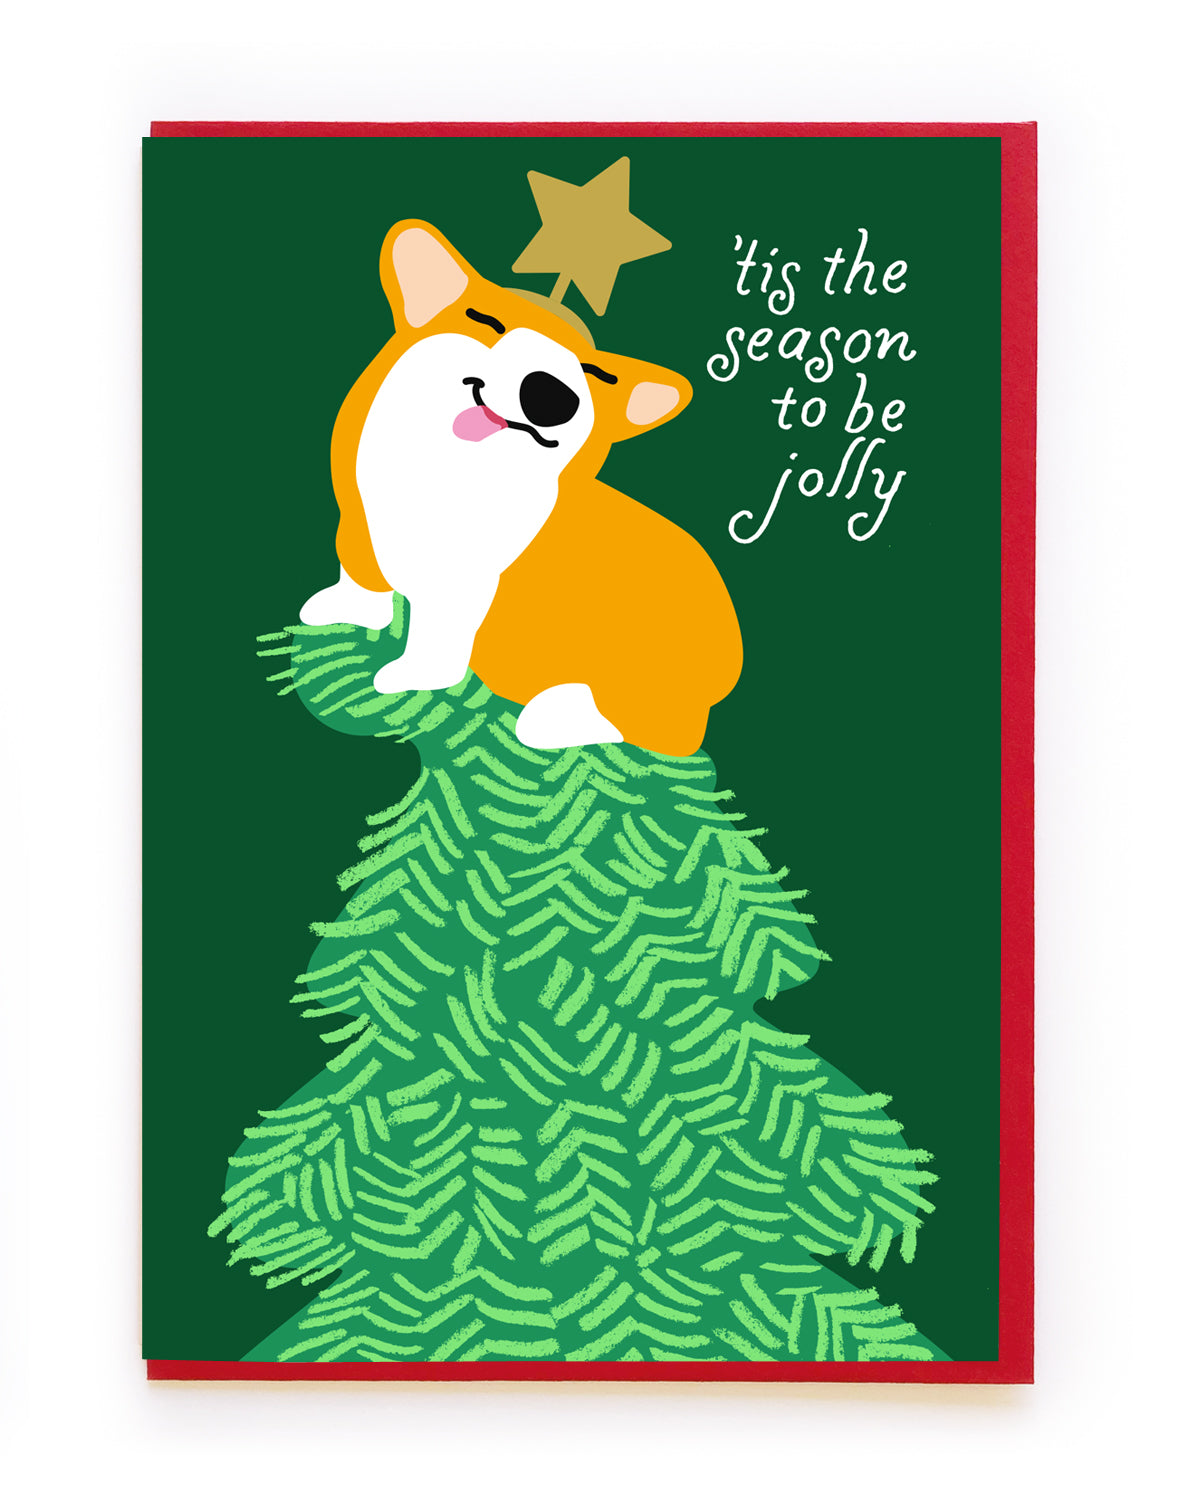 'THIS THE SEASON TO BE JOLLY | CARD BY NOI